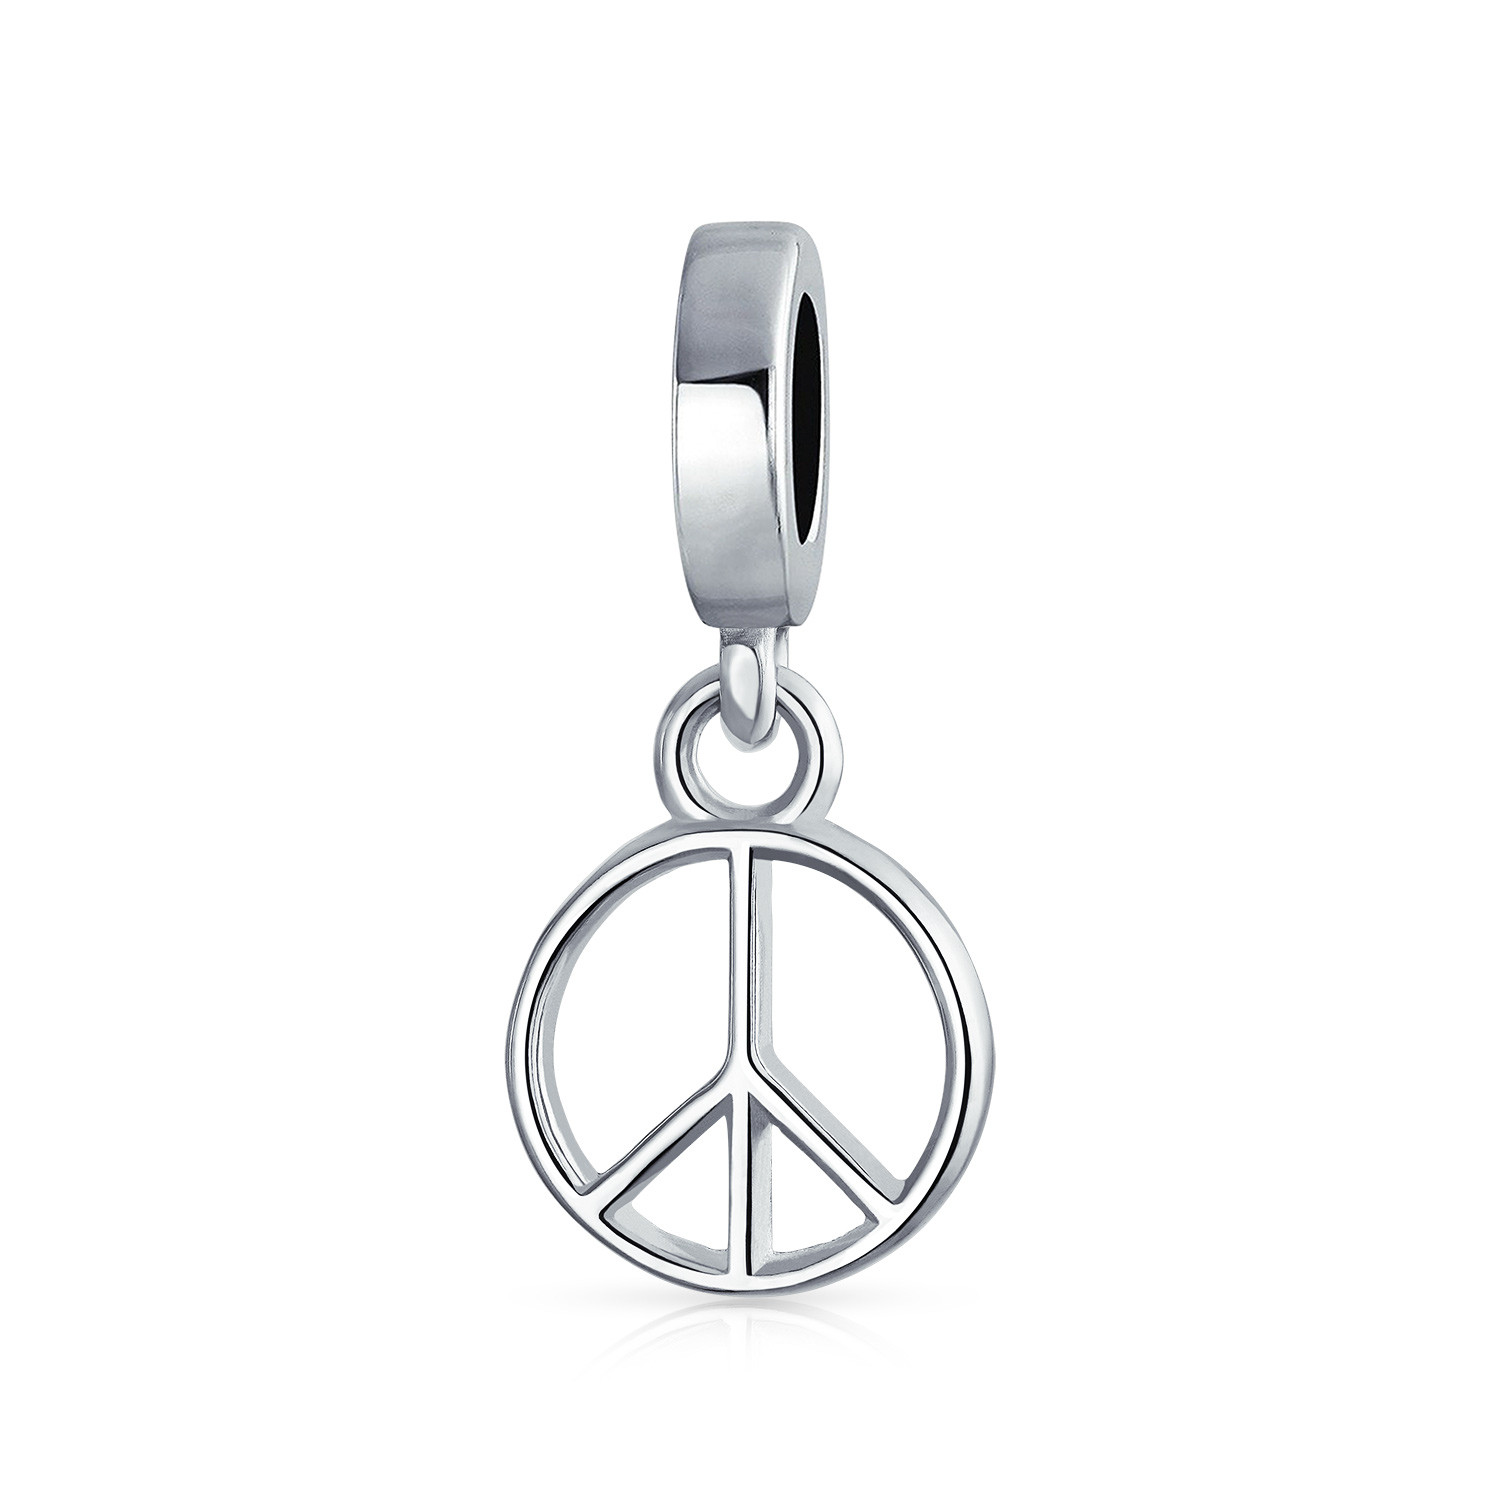 Buy Online  Peace Jewelry At Wholesale Price